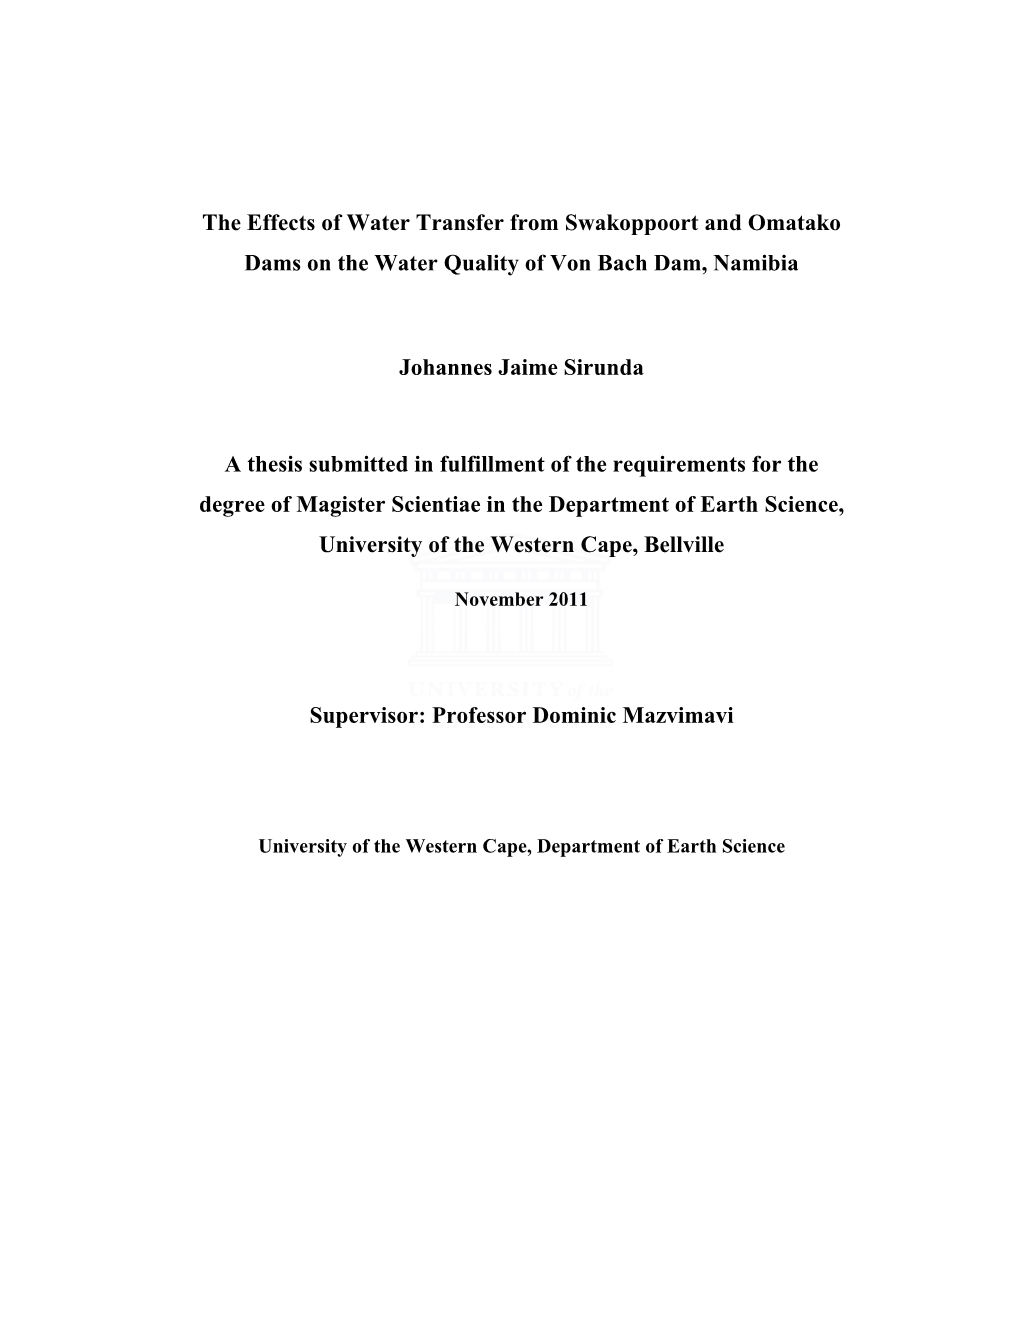 The Effects of Water Transfer from Swakoppoort and Omatako Dams on the Water Quality of Von Bach Dam, Namibia